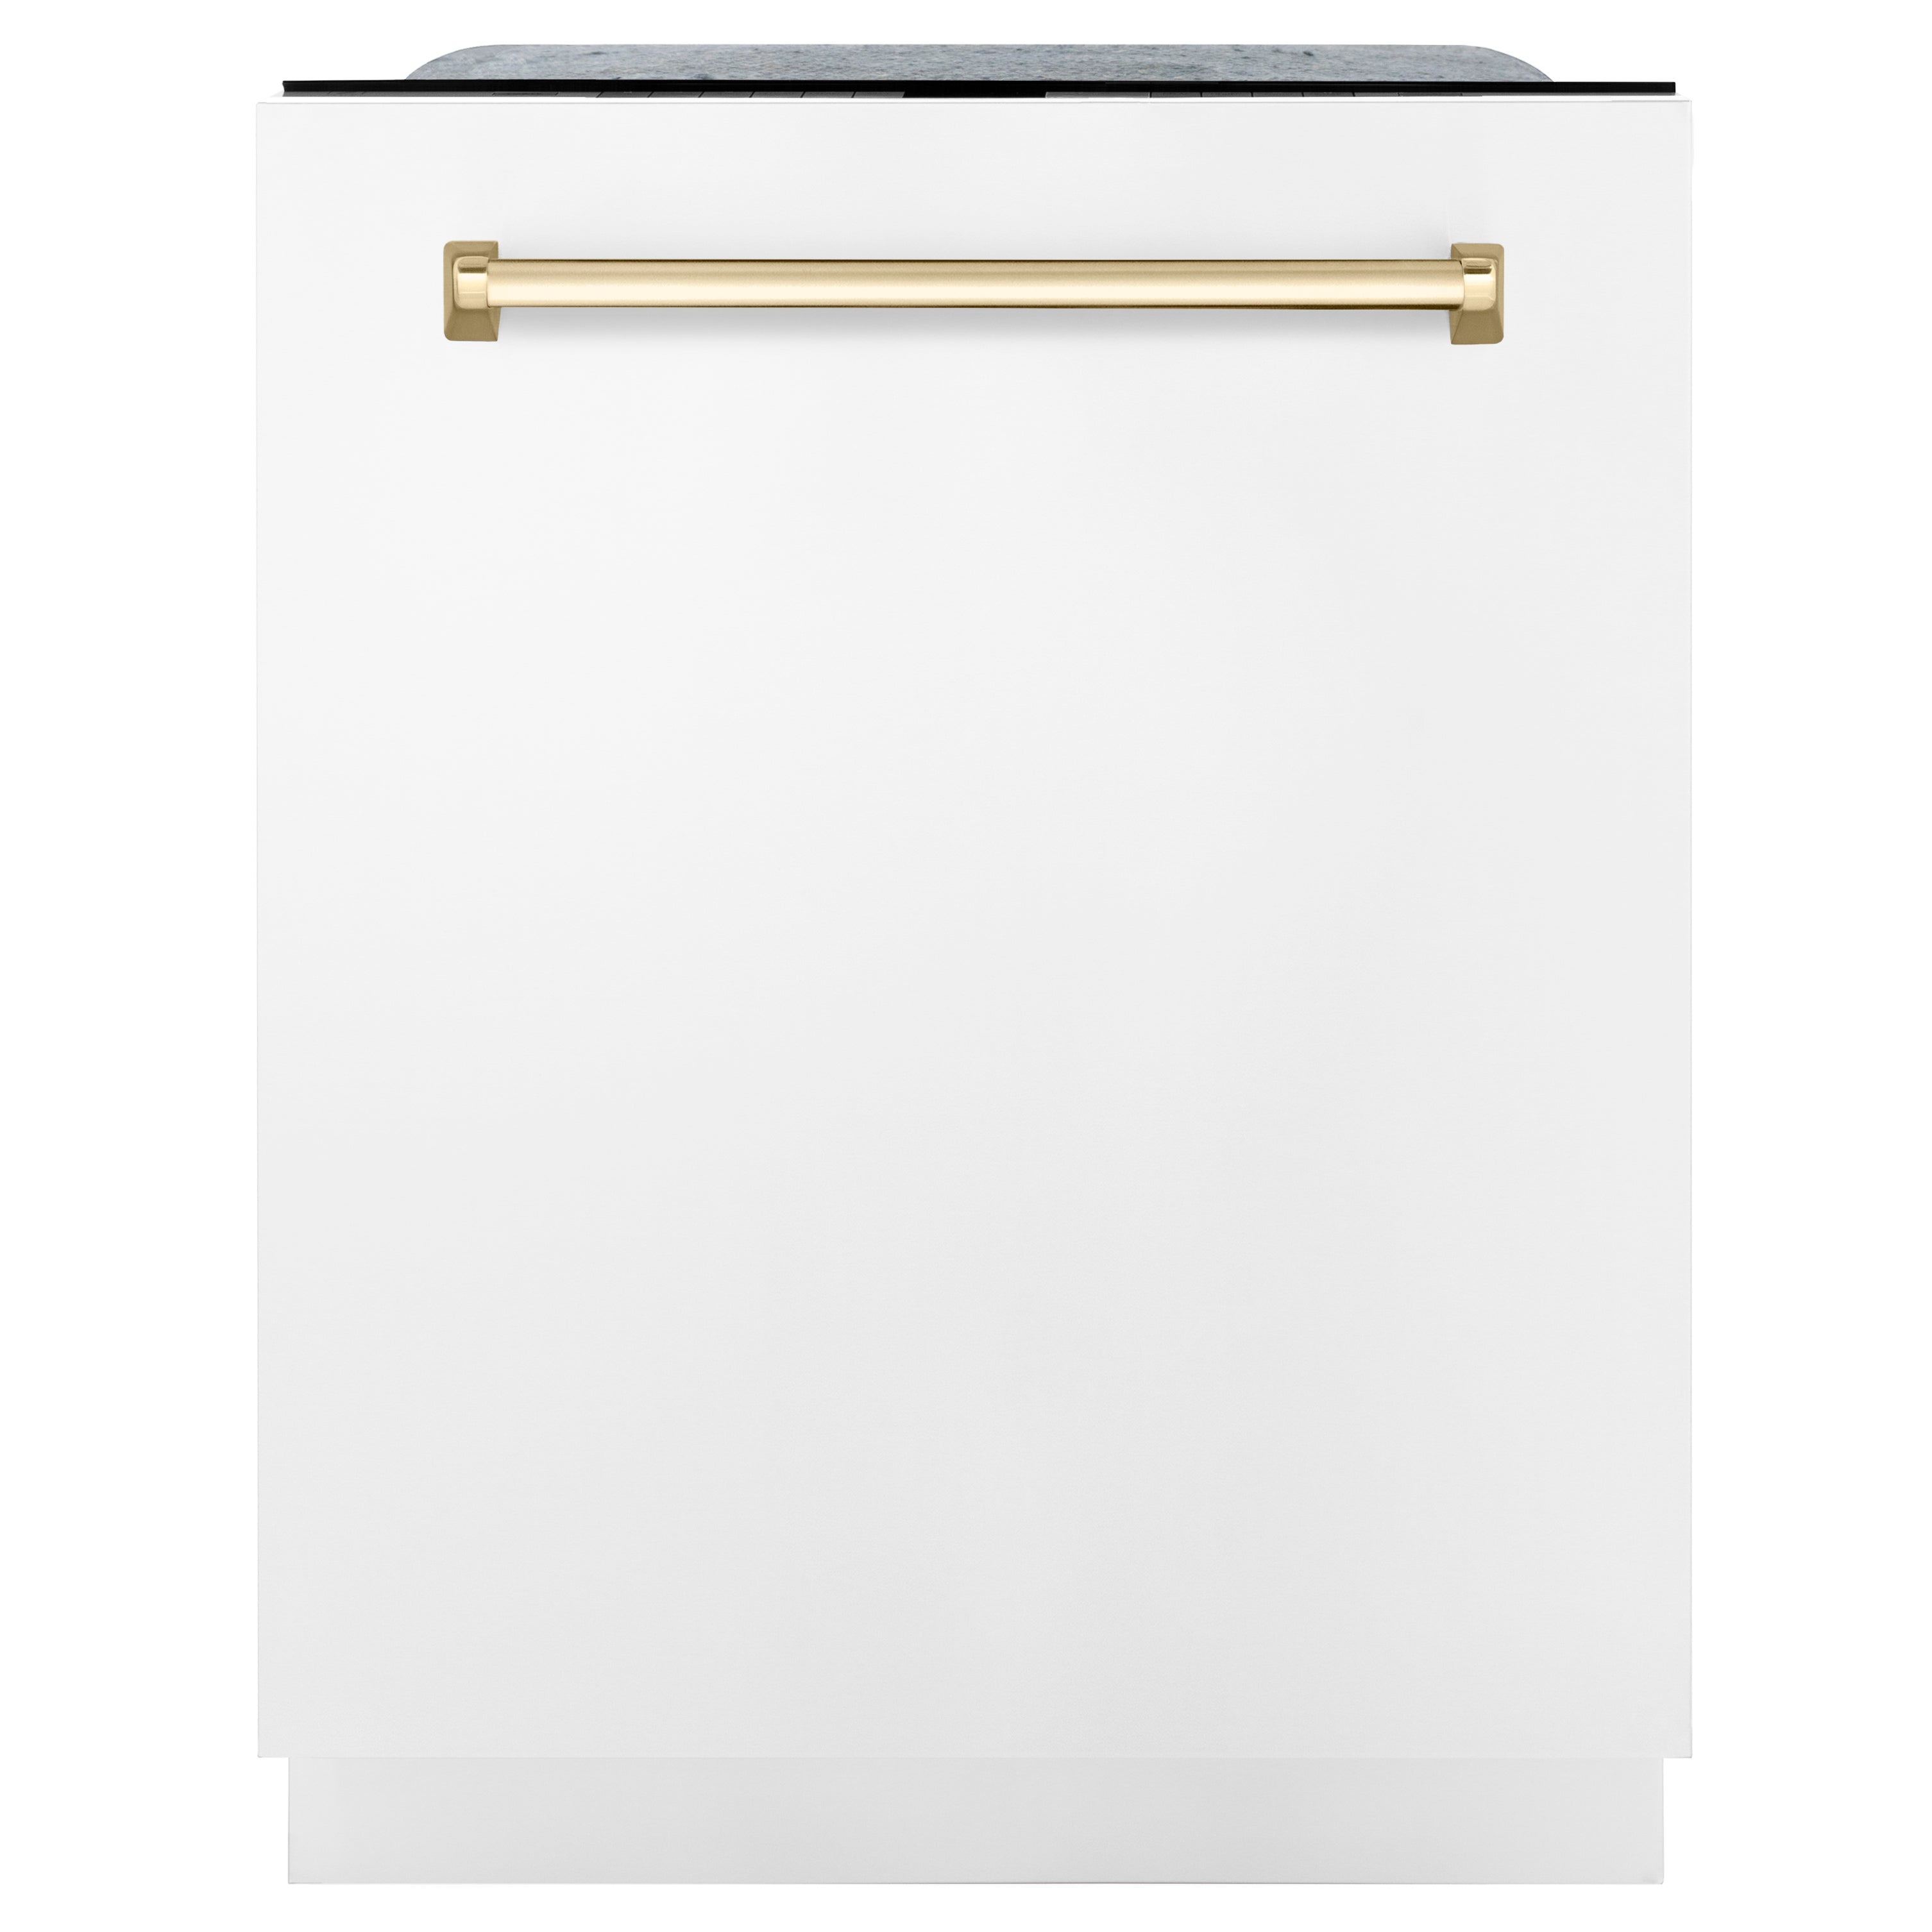 ZLINE Autograph Edition 24 in. 3rd Rack Top Touch Control Tall Tub Dishwasher in White Matte with Gold Accent Handle, 51dBa (DWMTZ-WM-24-G)